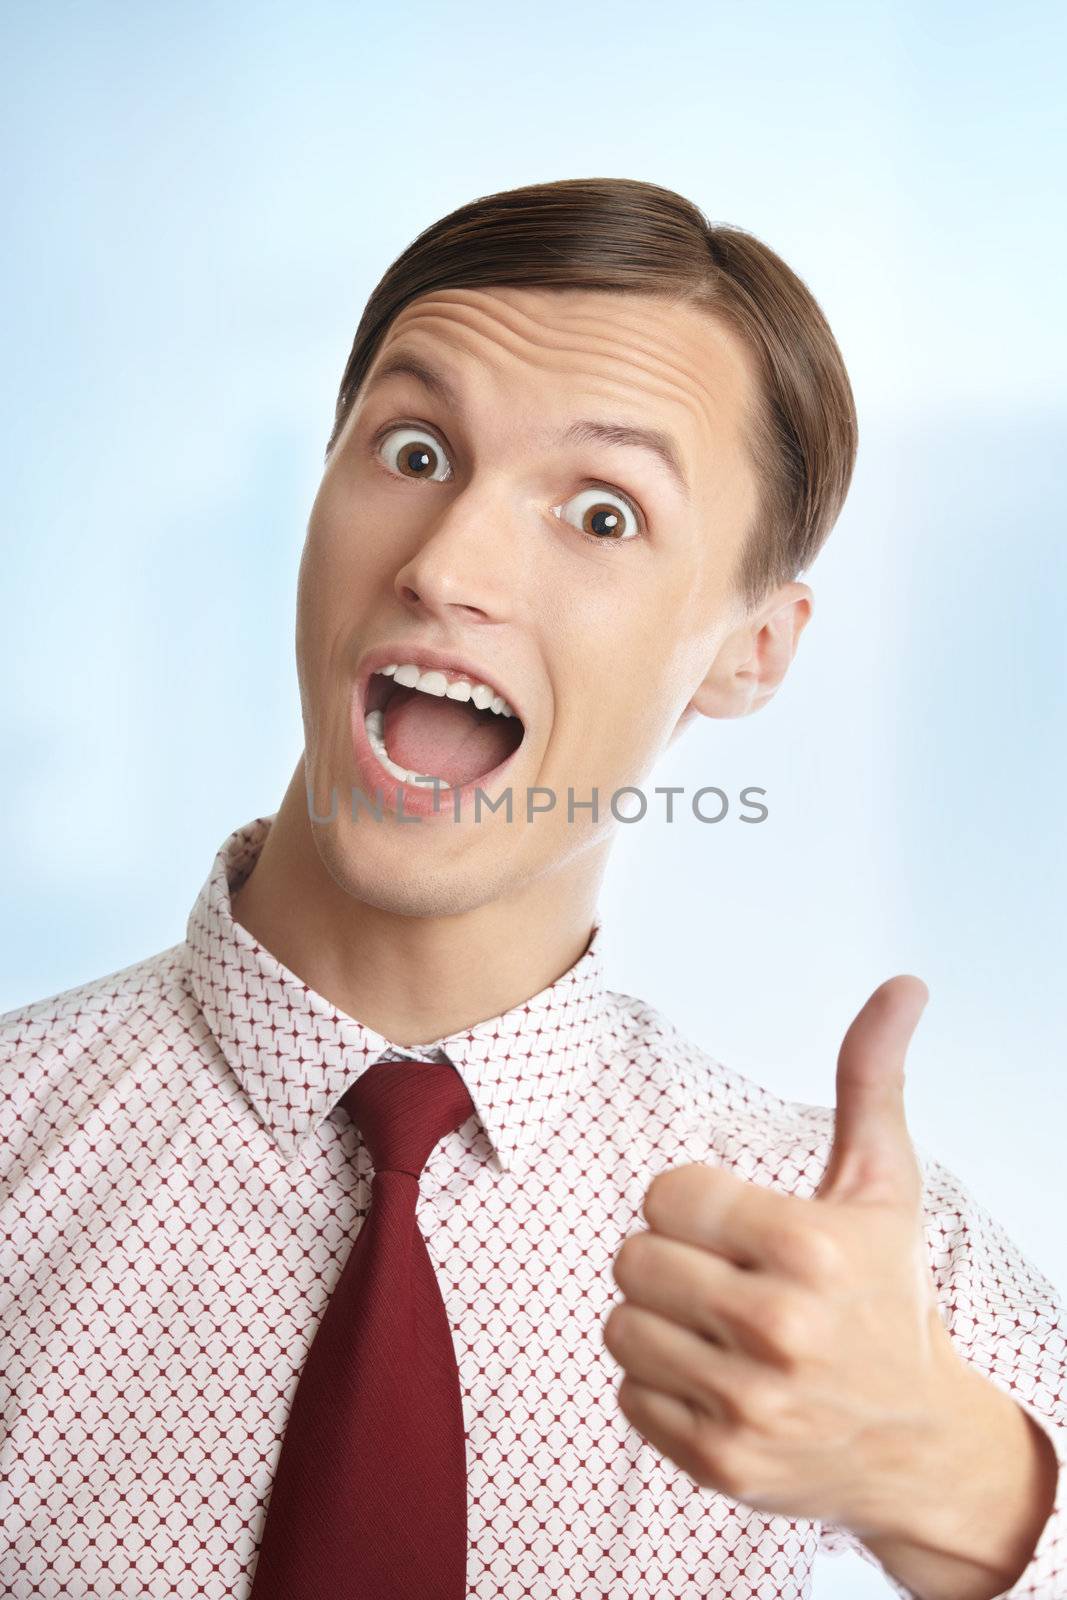 Successful businessman making thumbs up gesture on a blue background